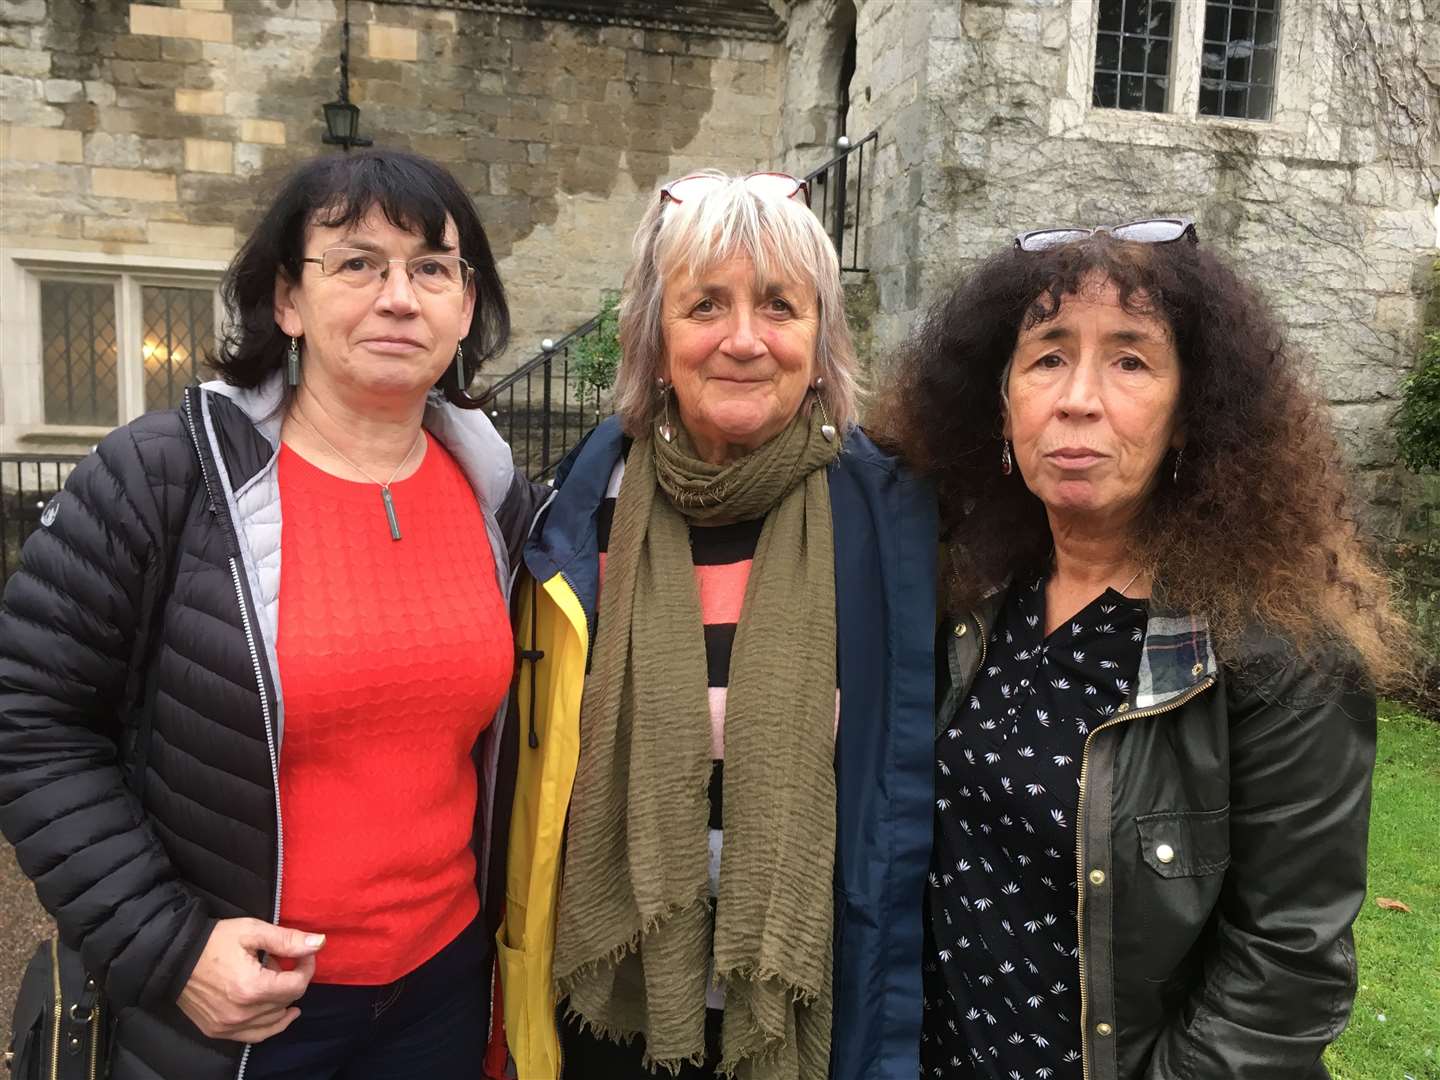 Ann Everett's sister Jan Williams, centre, with Mrs Everett's daughters Helen Curties, left, and Kathryn Everett outside Archbishop's Palace, Maidstone (19828510)